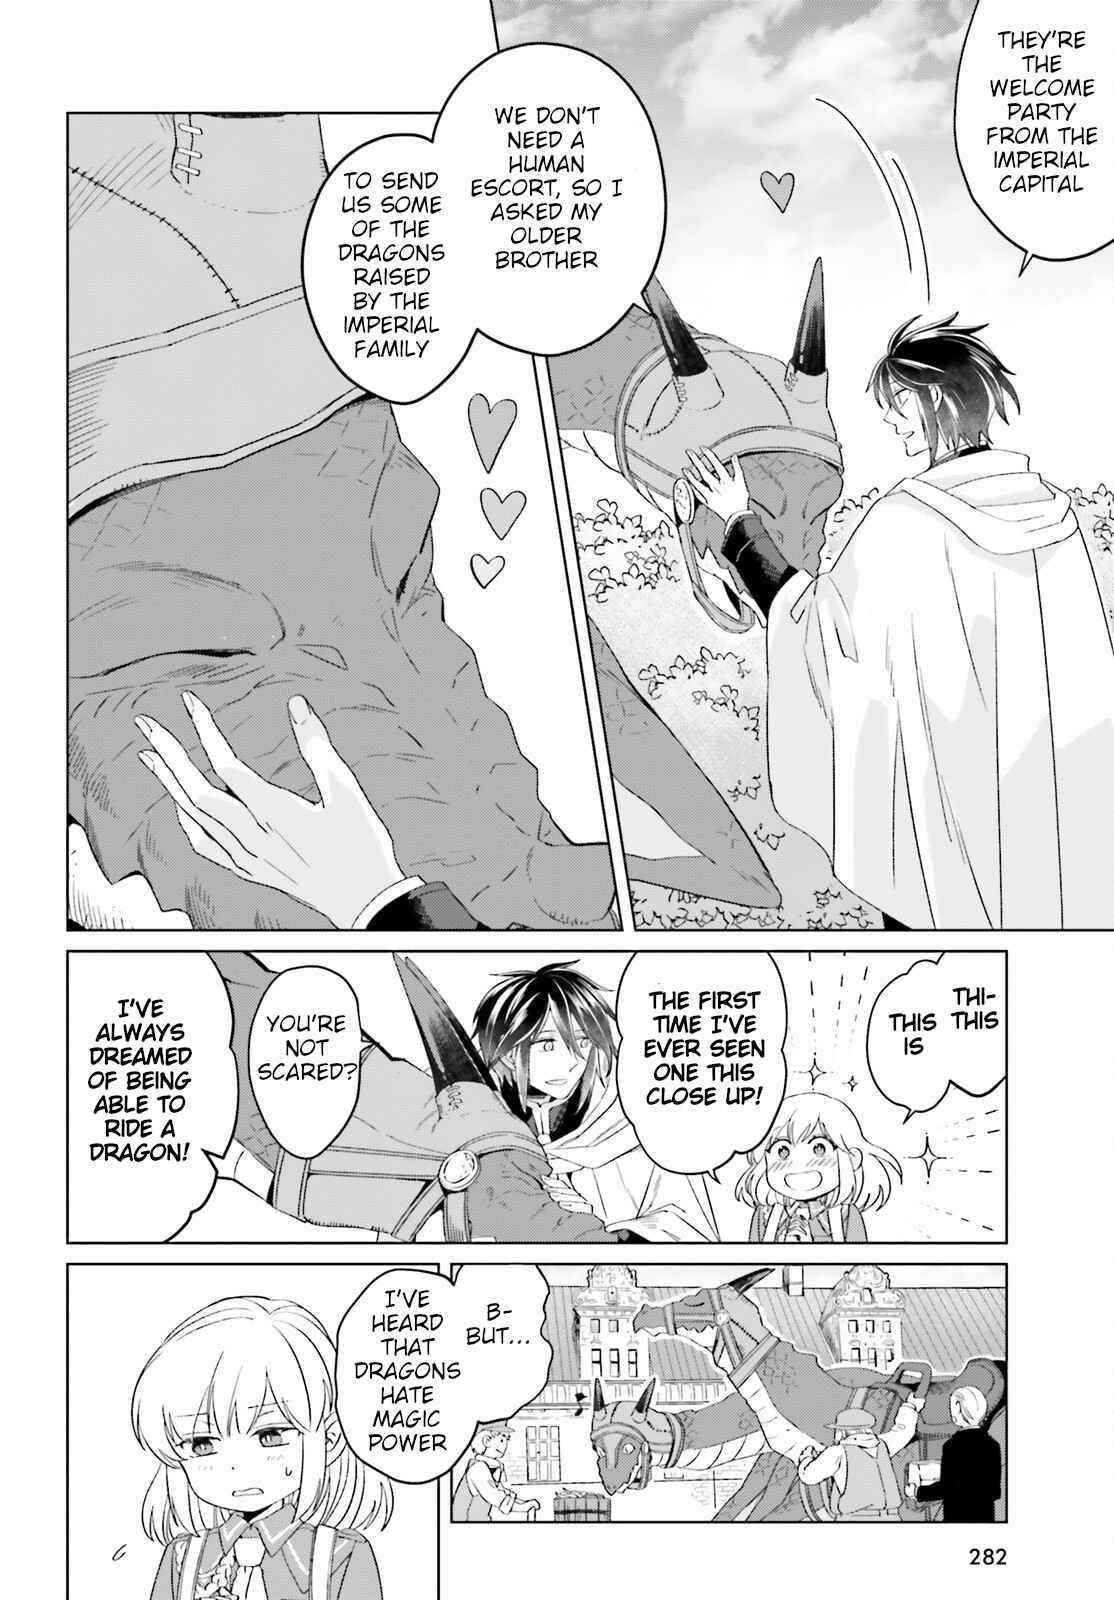 Win Over the Dragon Emperor This Time Around, Noble Girl! Chapter 16 - Page 16